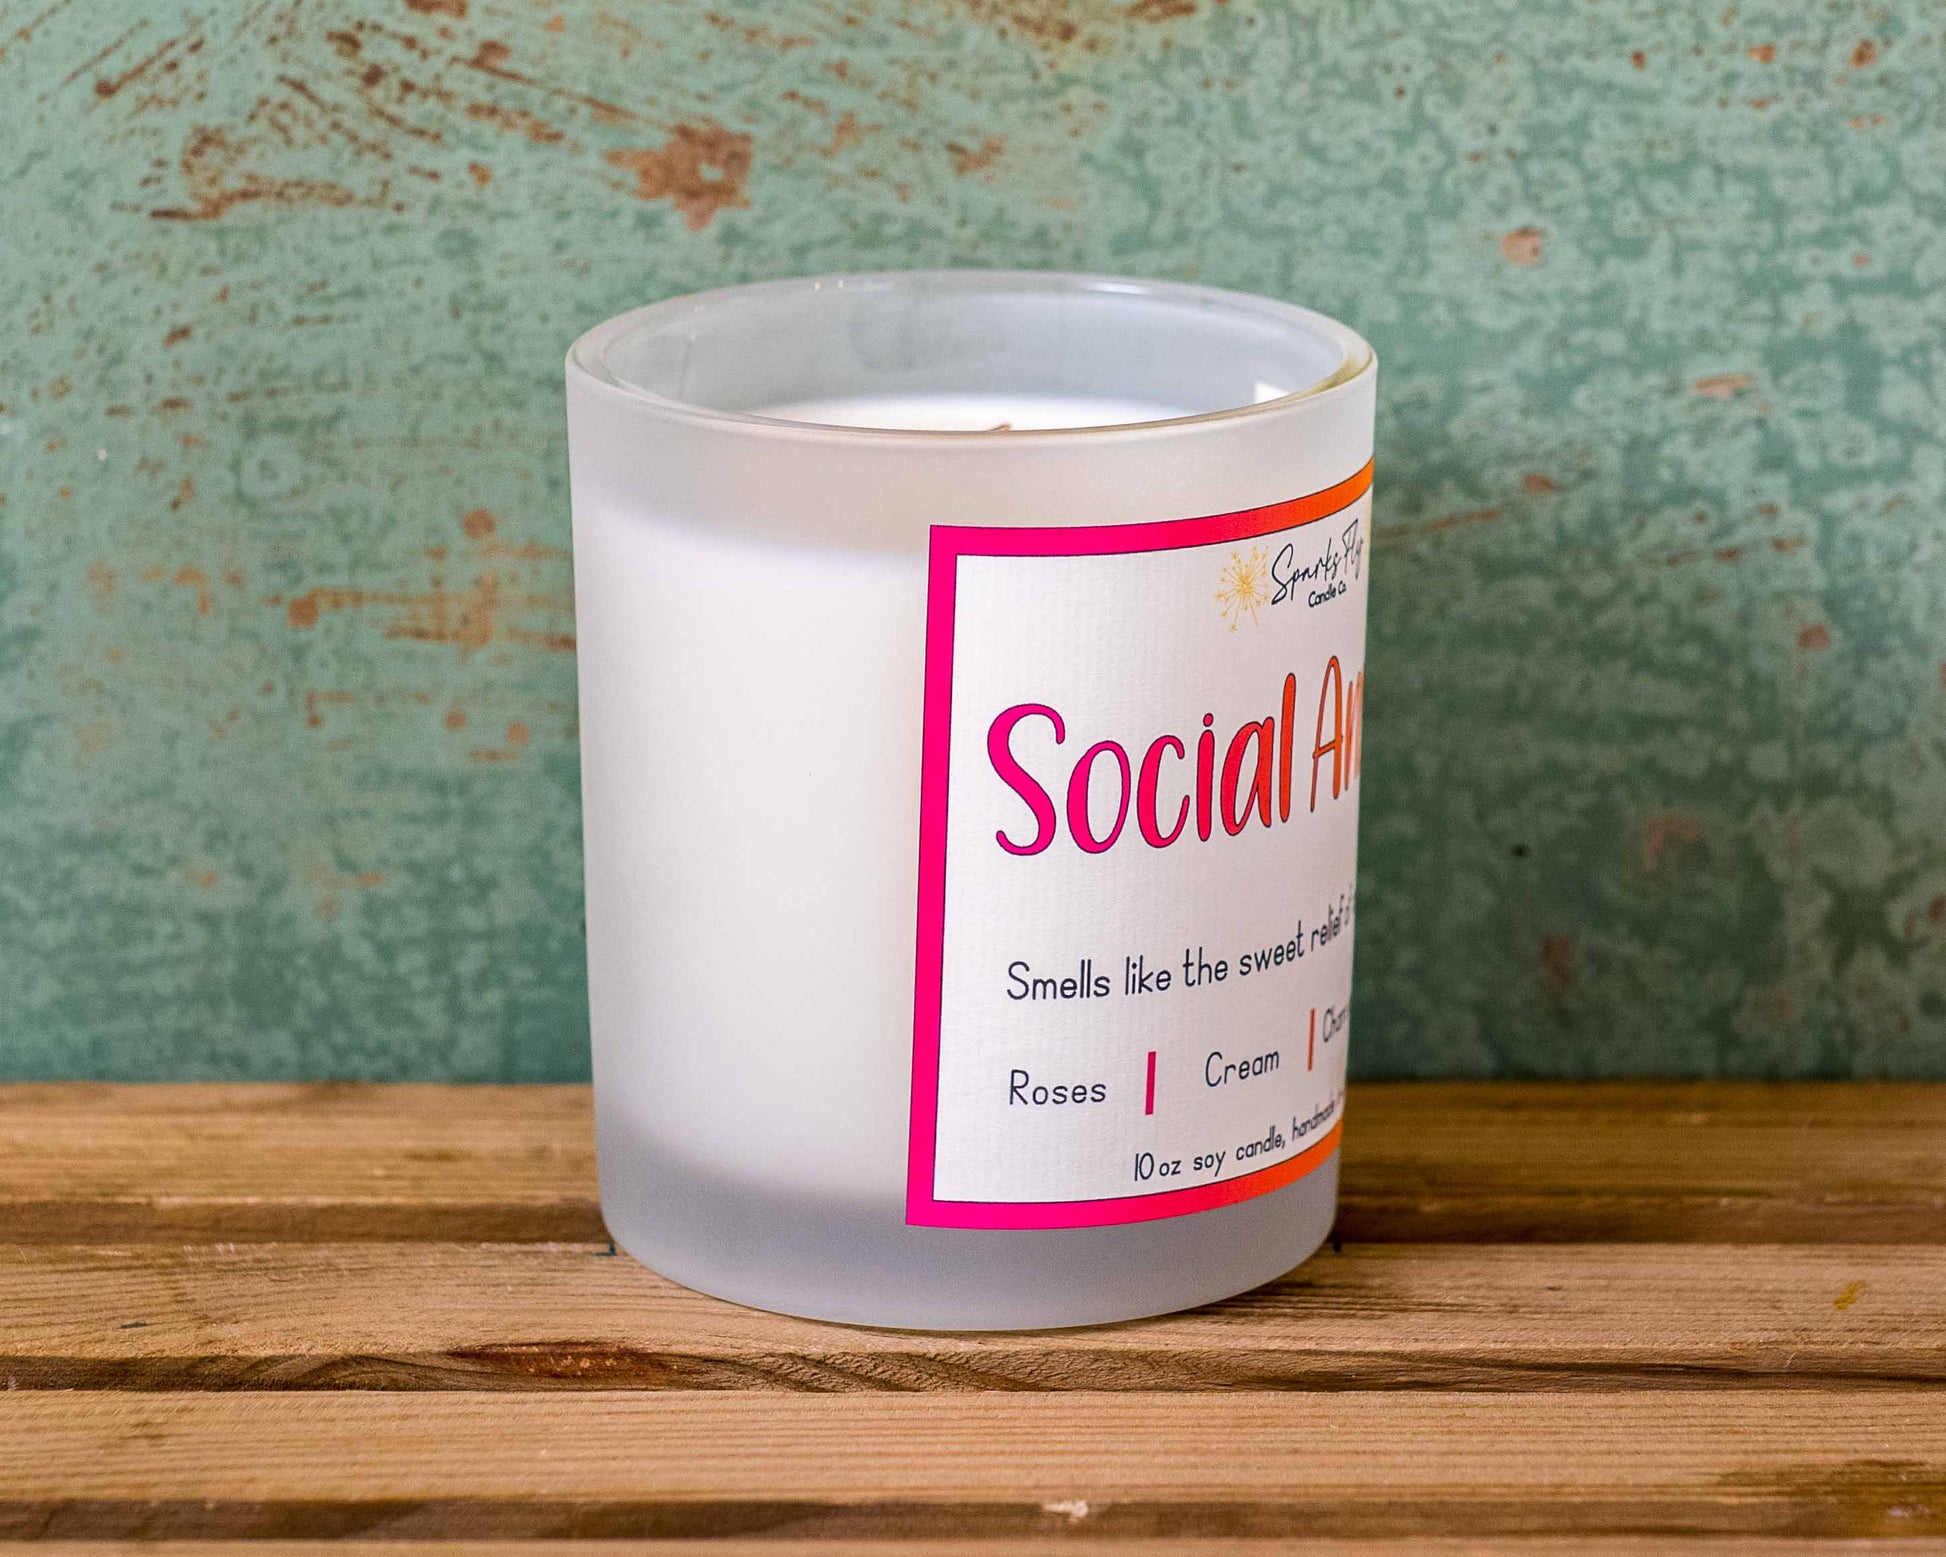 Social Anxiety Candle - The comforting aroma of happily staying in.